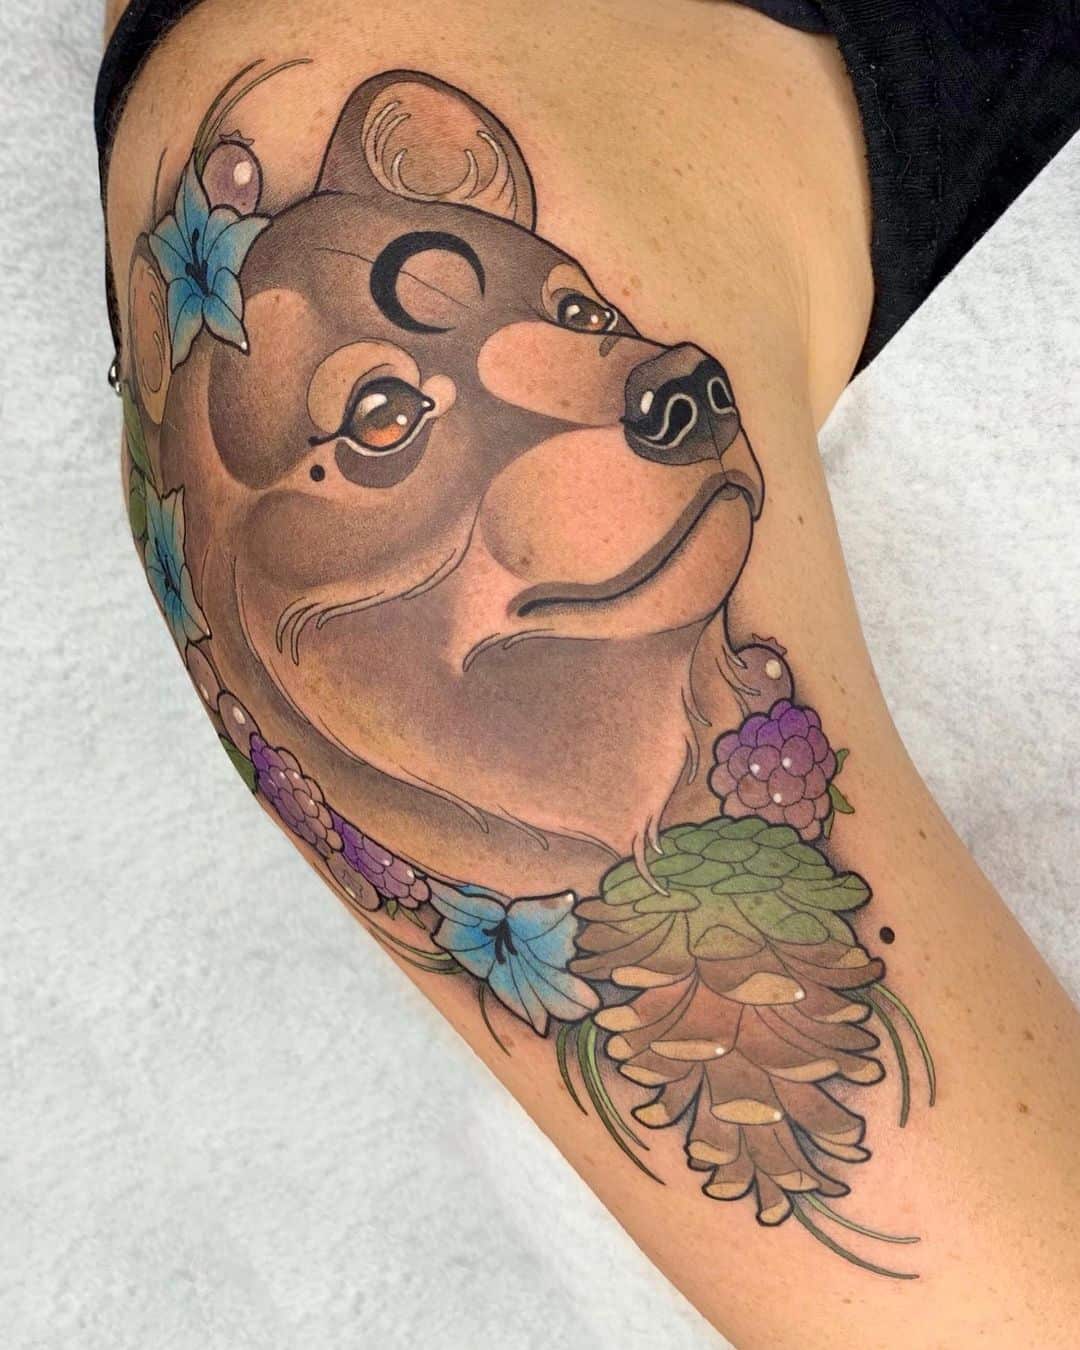 Lucky You Tattoo - A teddy bear on a thigh by Craig Rooney! 🧸 ⁣ ⁣ Craig  Rooney • @craigrooneytattoos ⁣ ⁣ To make an appointment with Craig, send  him an e-mail